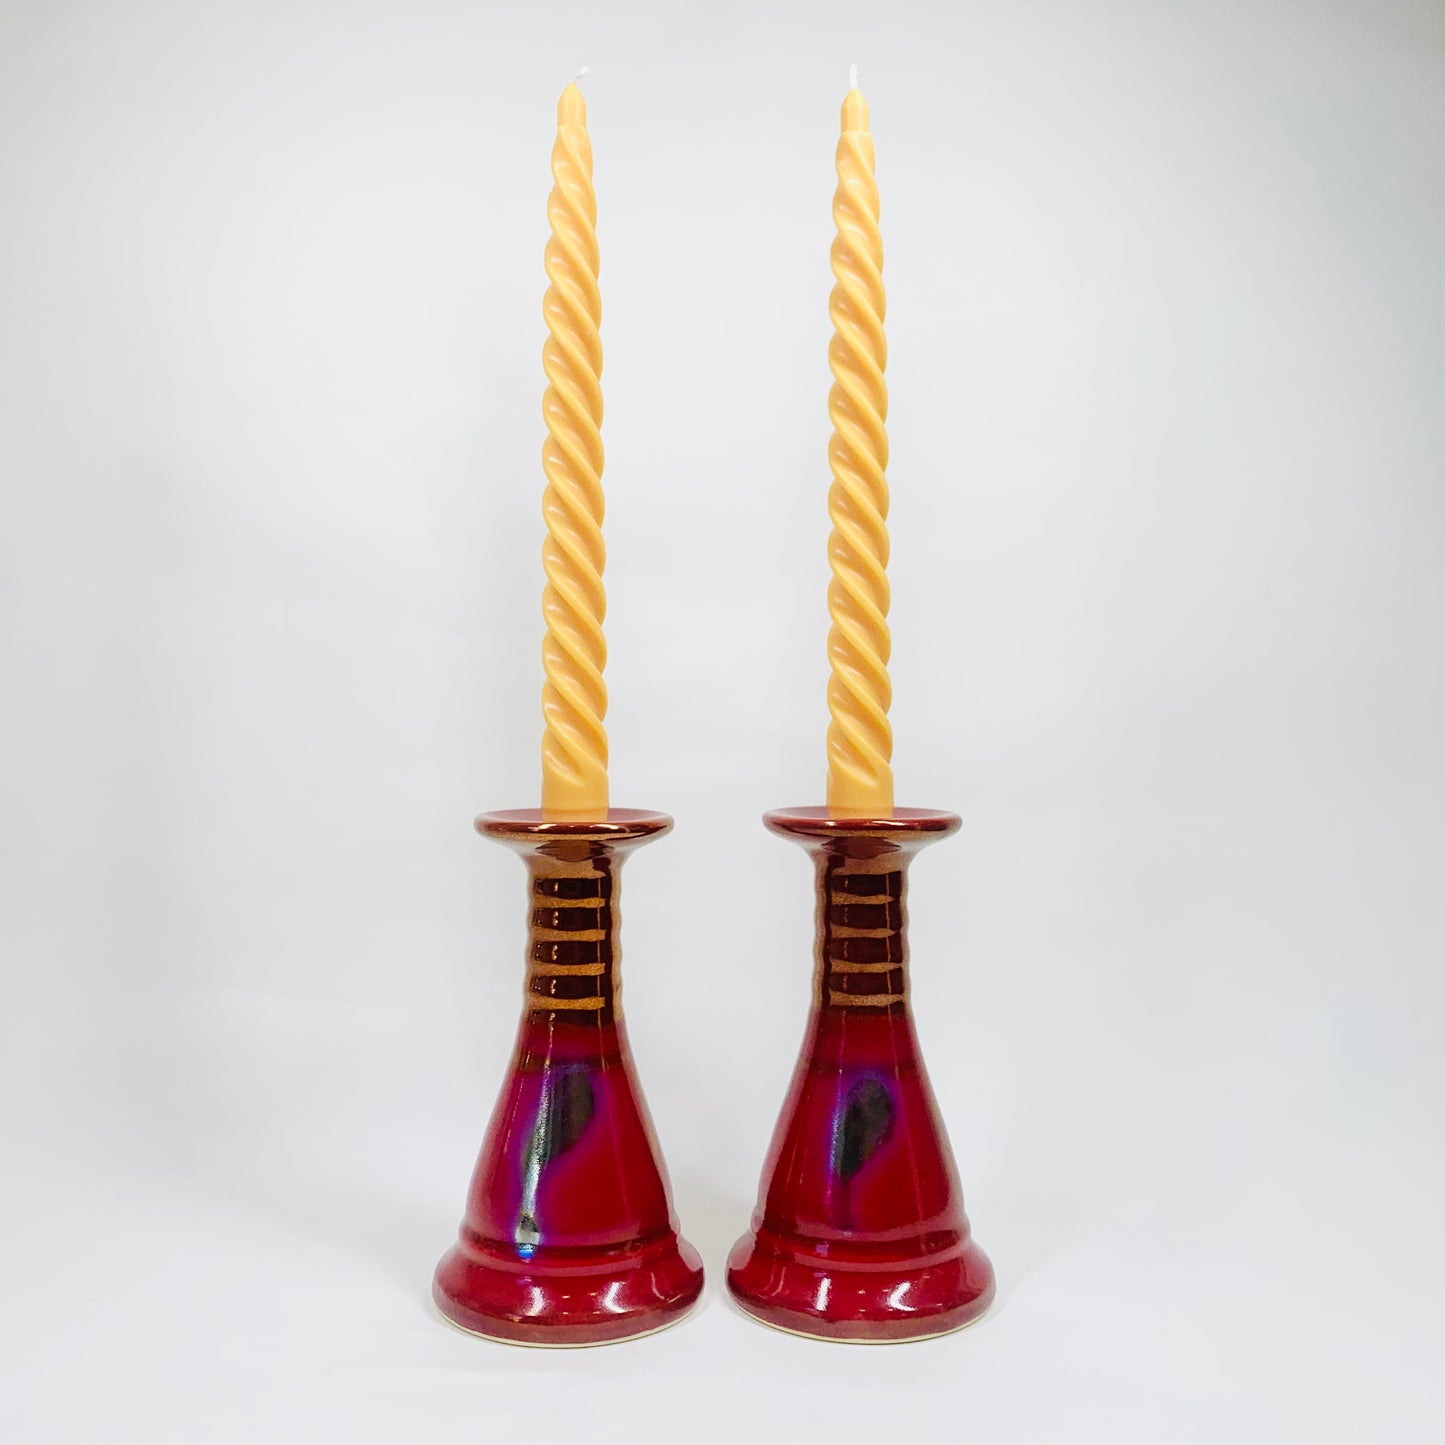 Pair of Japanese 1980s lustreware porcelain candle holders